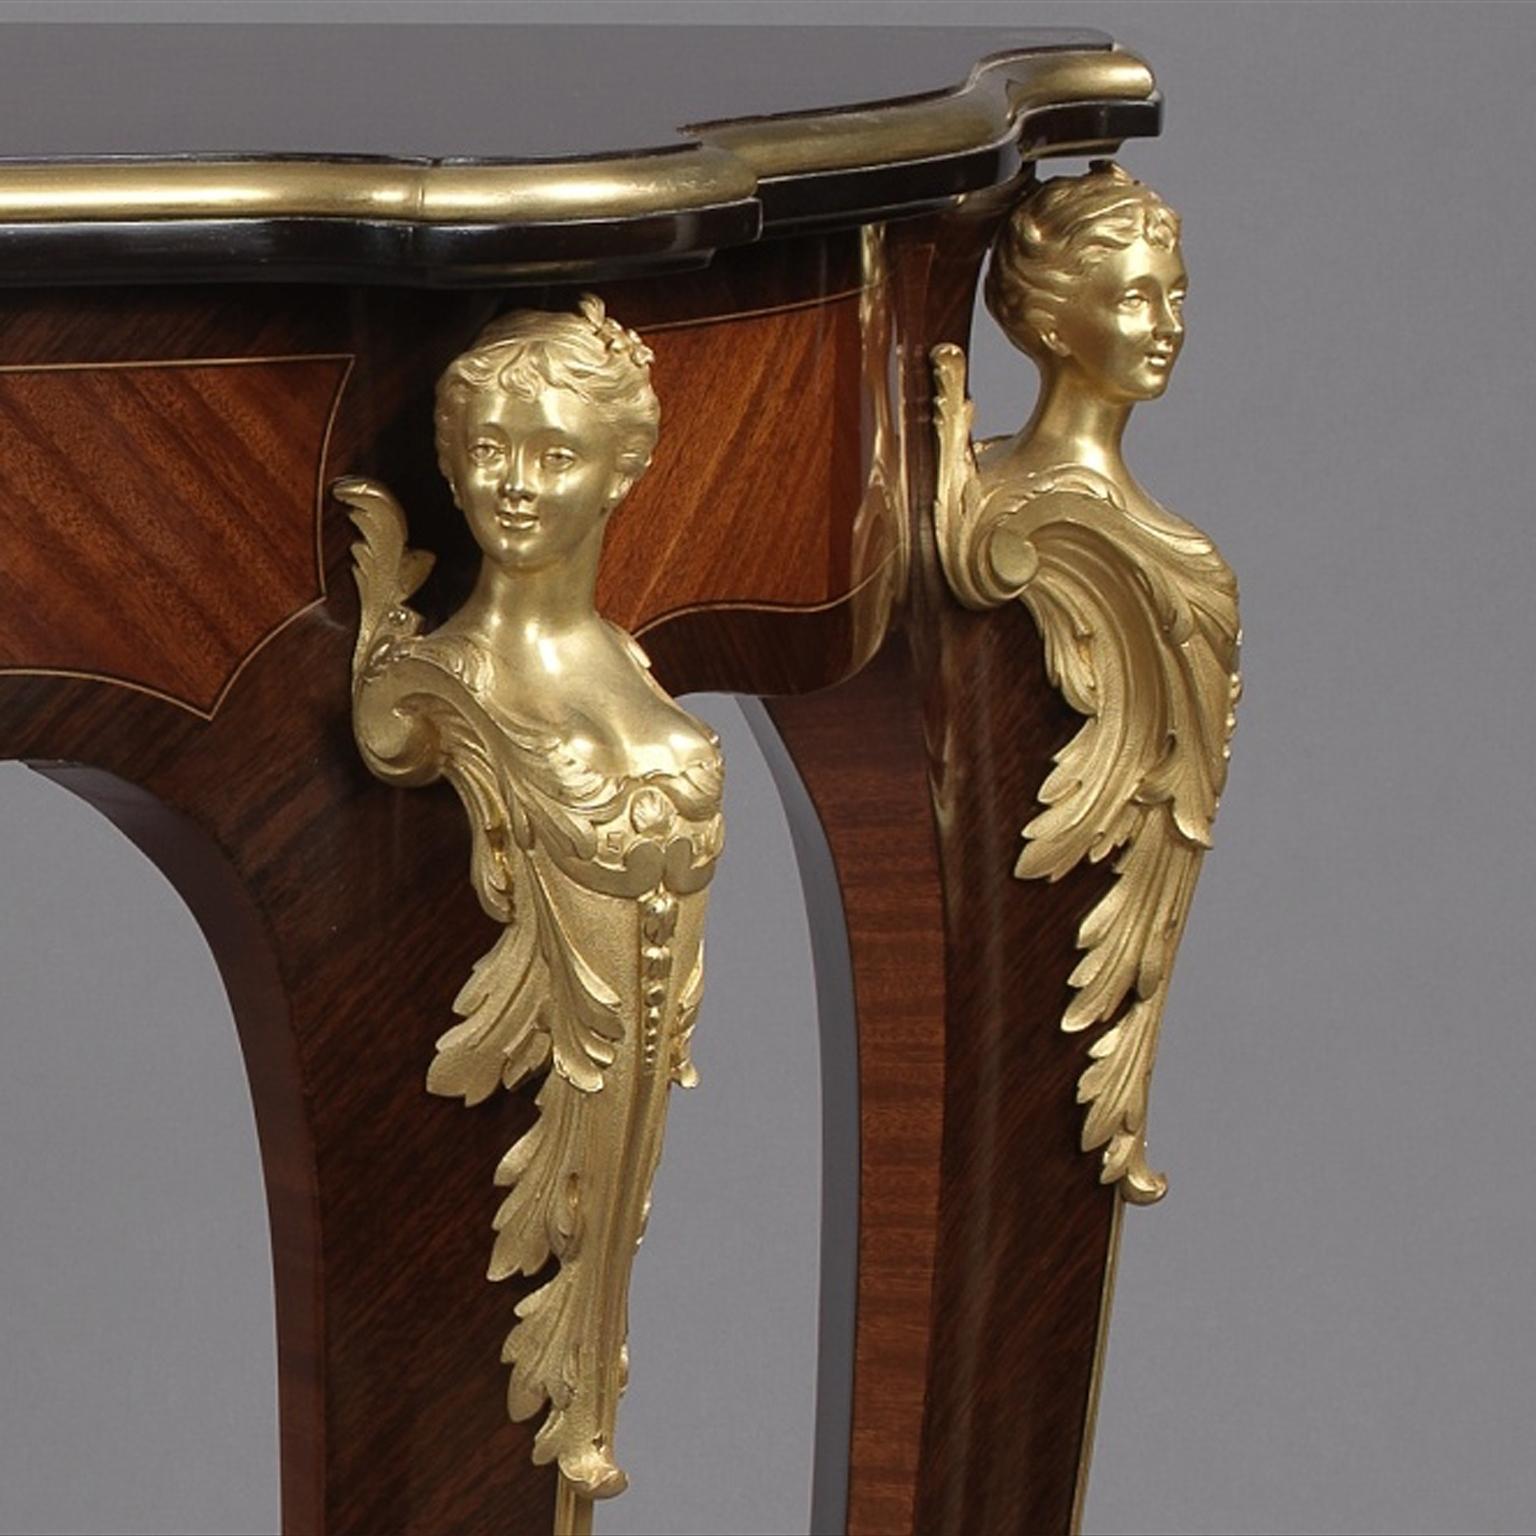 A fine Louis XV style gilt-bronze mounted console table, in the manner of François Linke.

This fine console table has a shaped top above a crossbanded frieze centred by a foliate gilt-bronze cartouche mount. The four cabriole legs are headed by